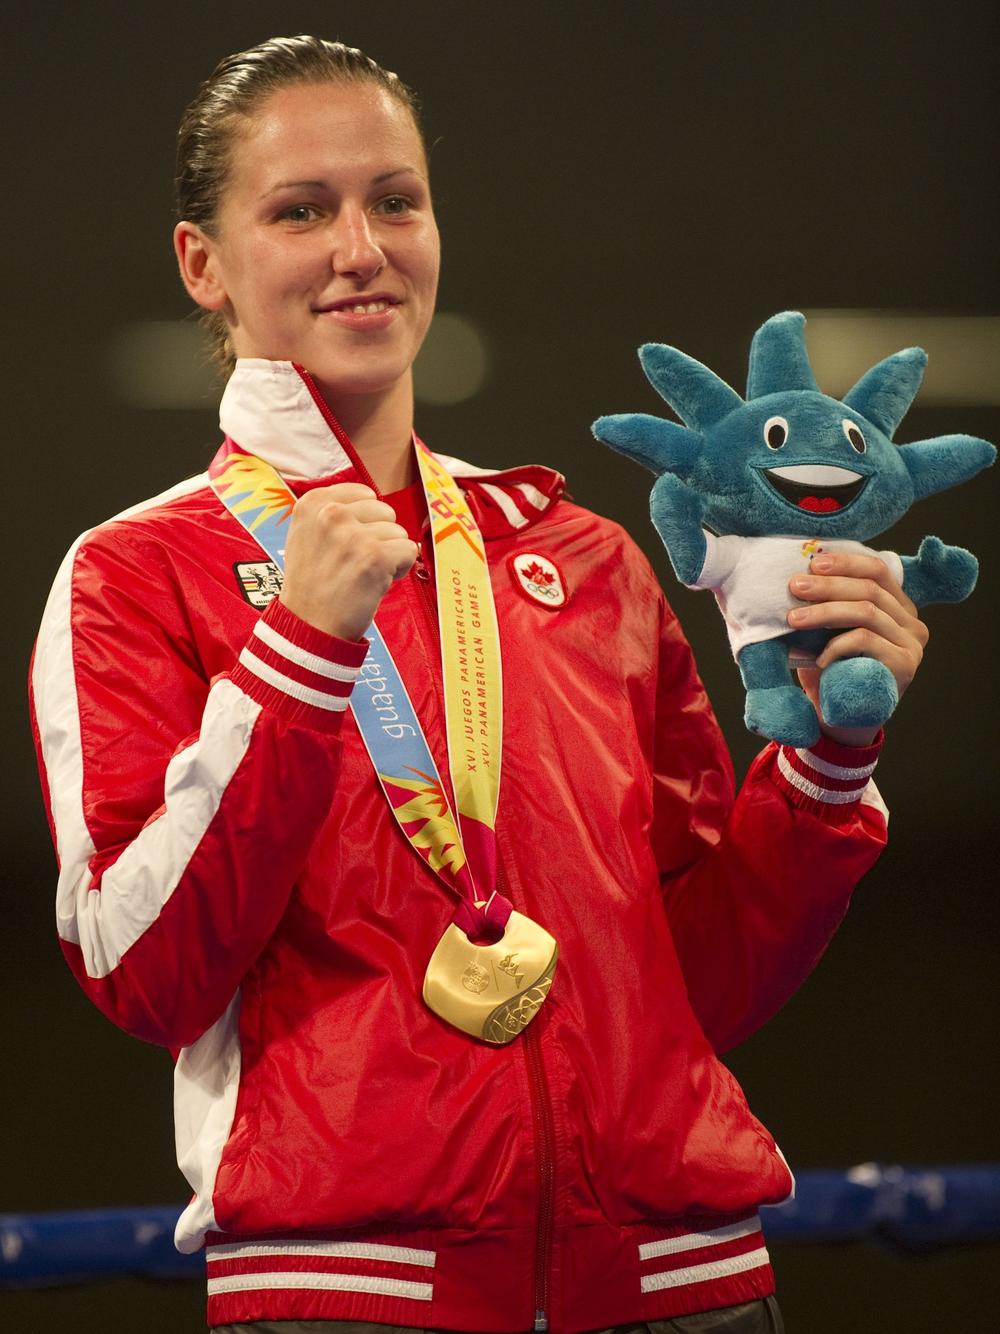 Canadian Mandy Bujold celebrates with her Gold medal after finish in the women's 51Kg weight final encounter during the 2011 Pan-American Games in Mexico.